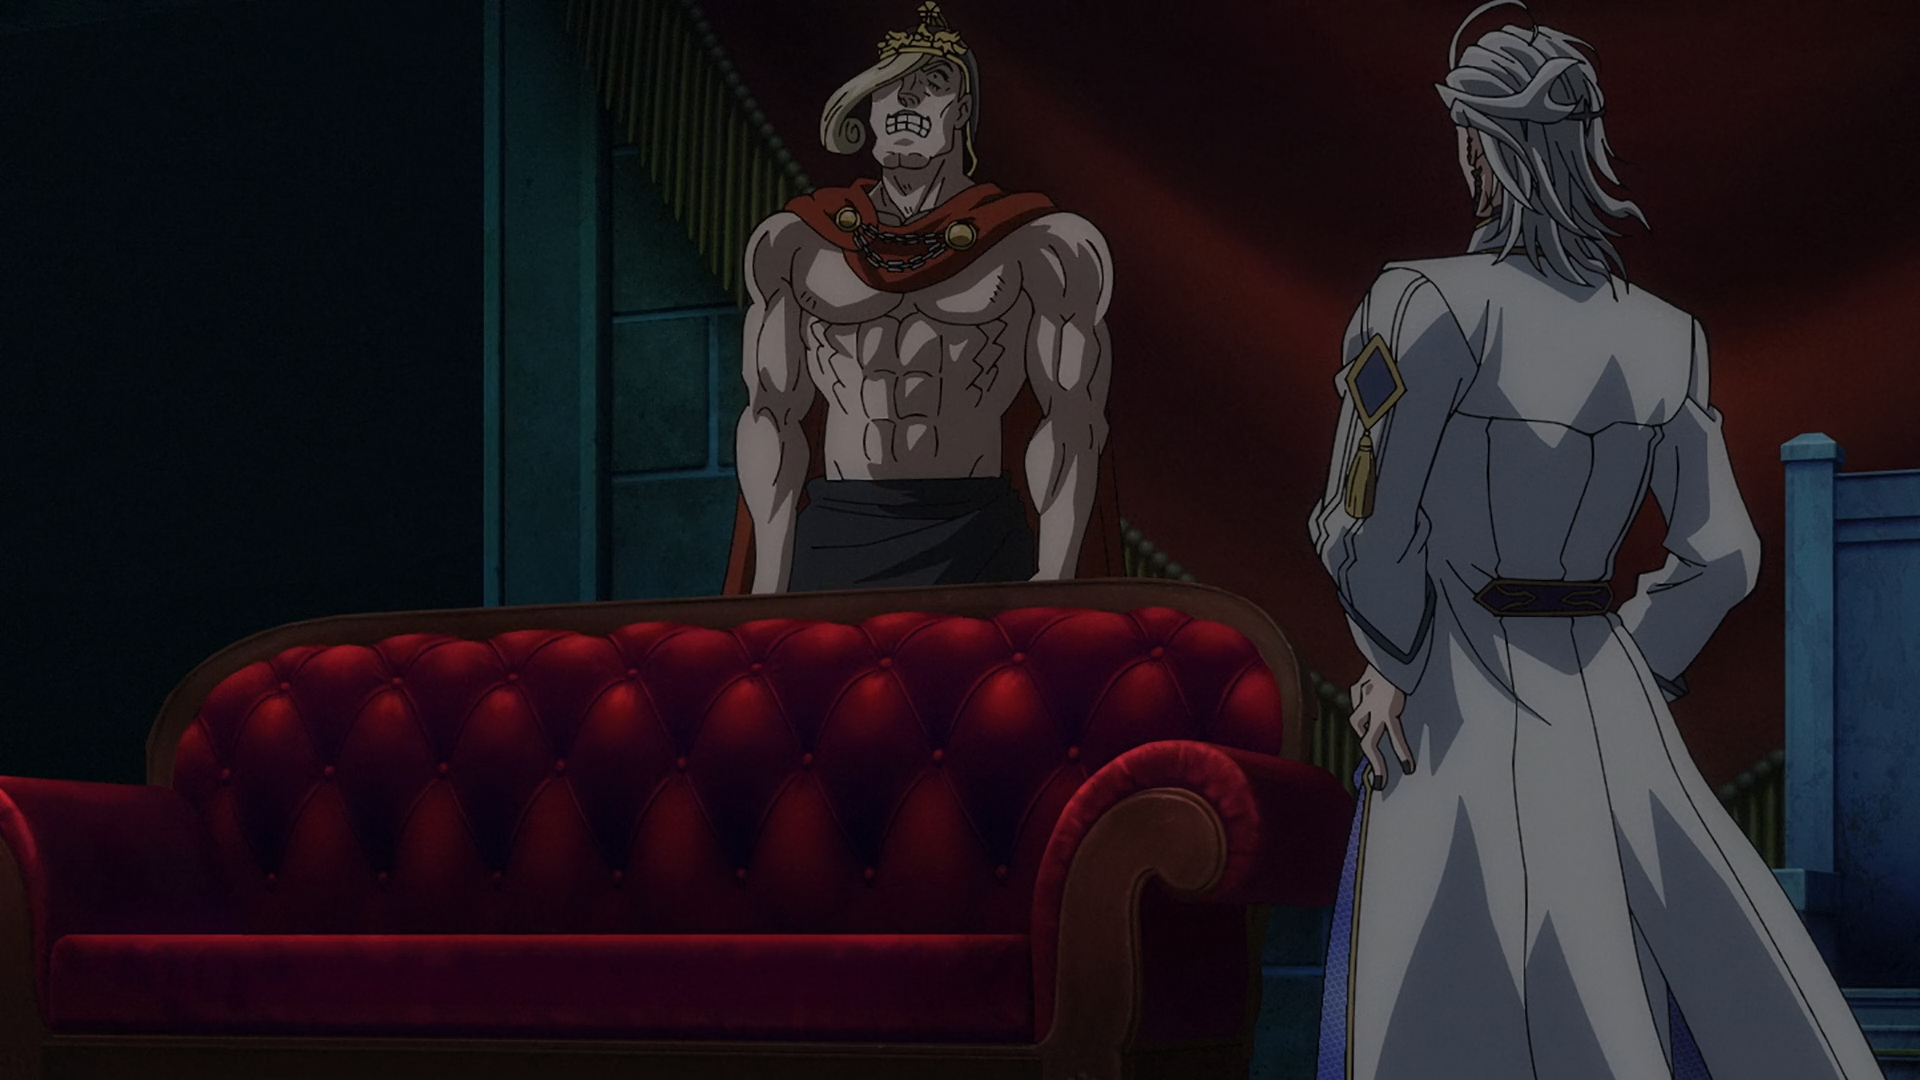 Ares_gives_up_the_sofa_to_Hades_anime.pn